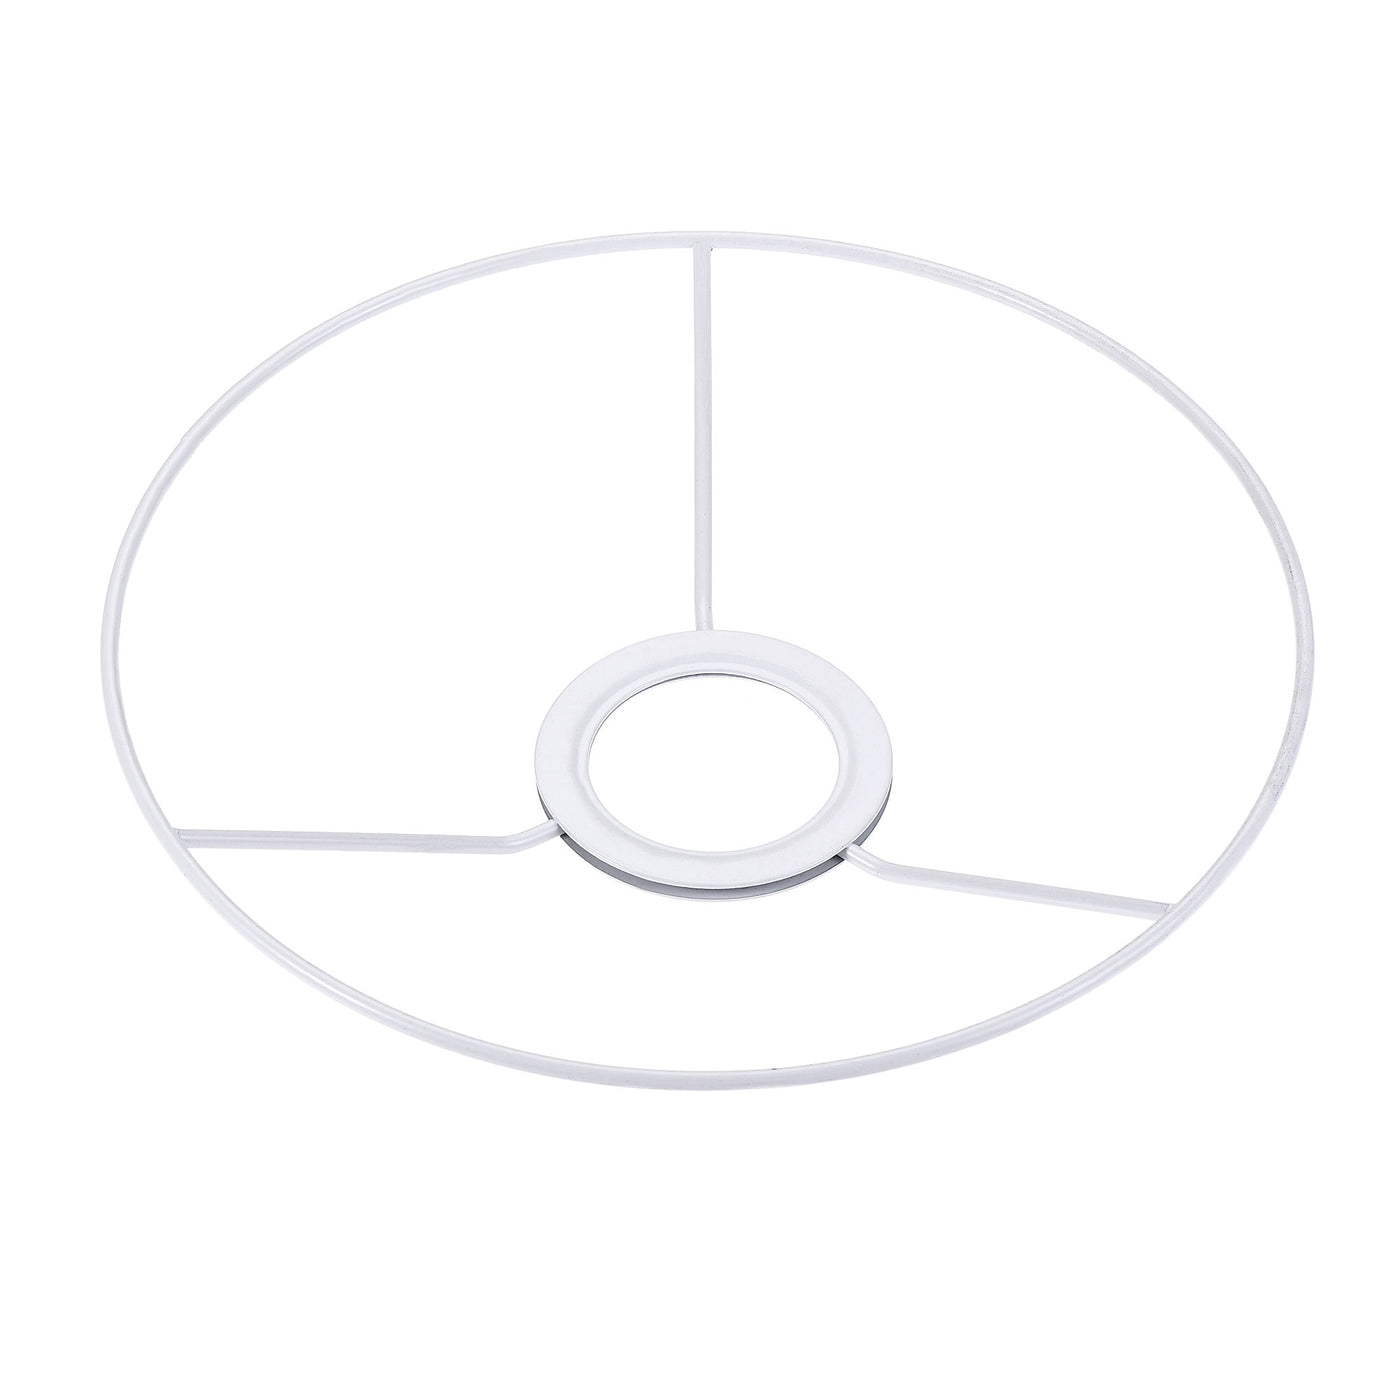 uxcell Uxcell Lamp Shade Ring, 200mm Dia. Lampshade Holder Frame Ring for E26/E27 Lamp Socket, Baked Coating Iron 1 Set